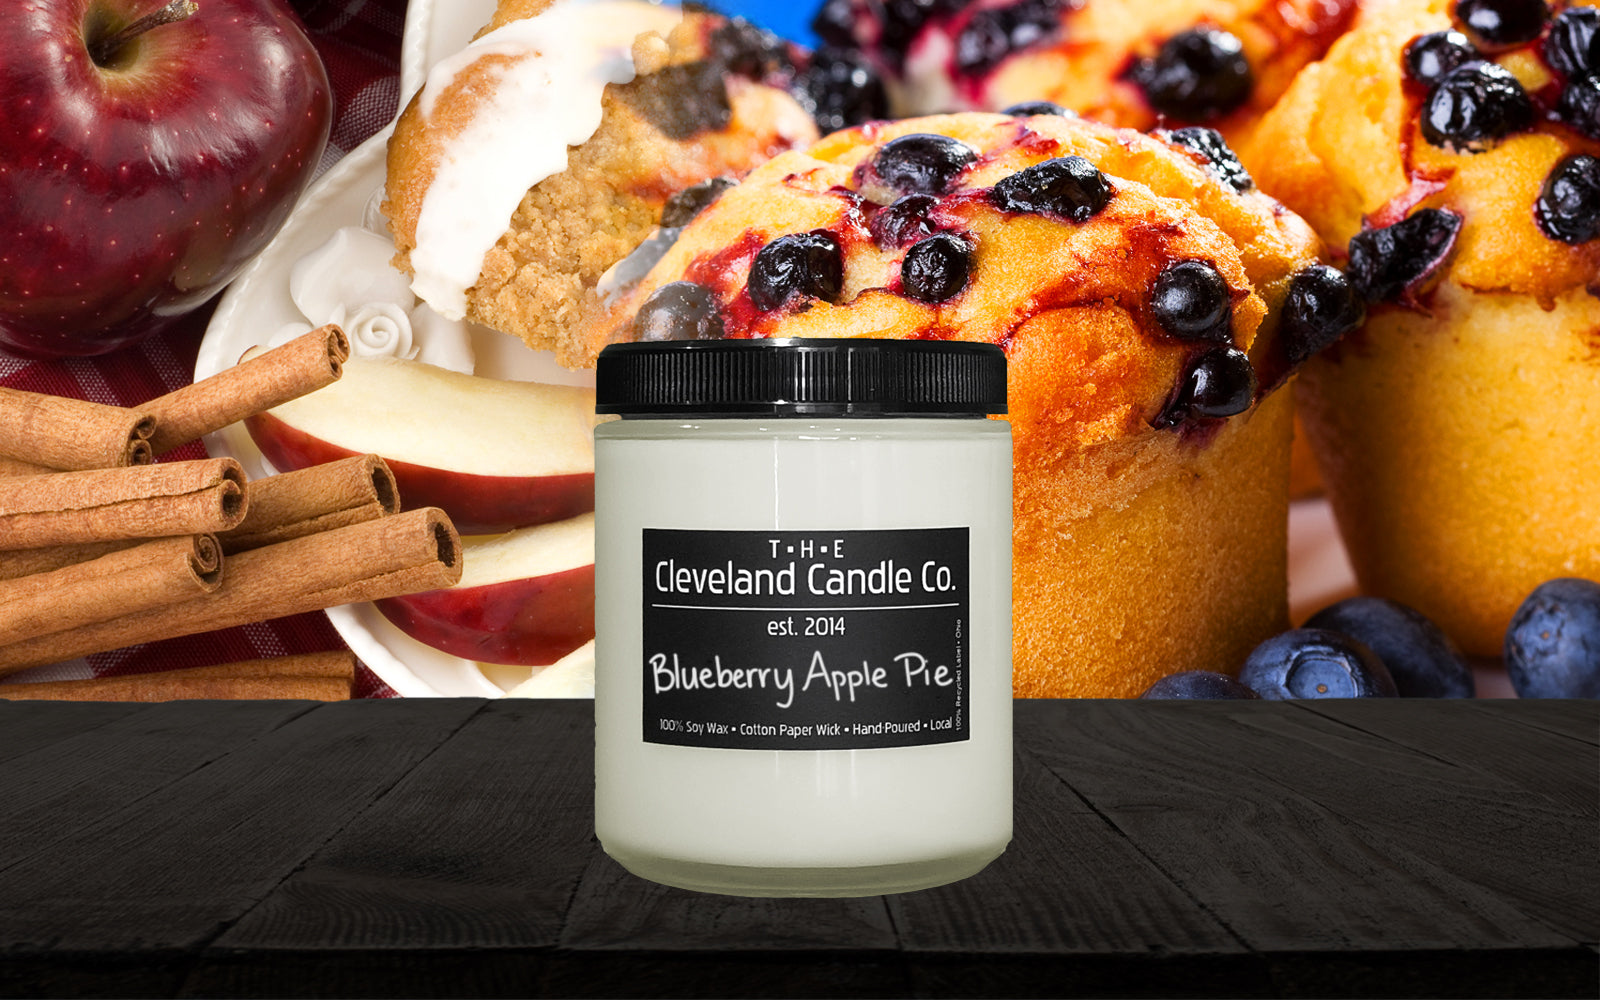 Blueberry Apple Pie - Cleveland Candle Company